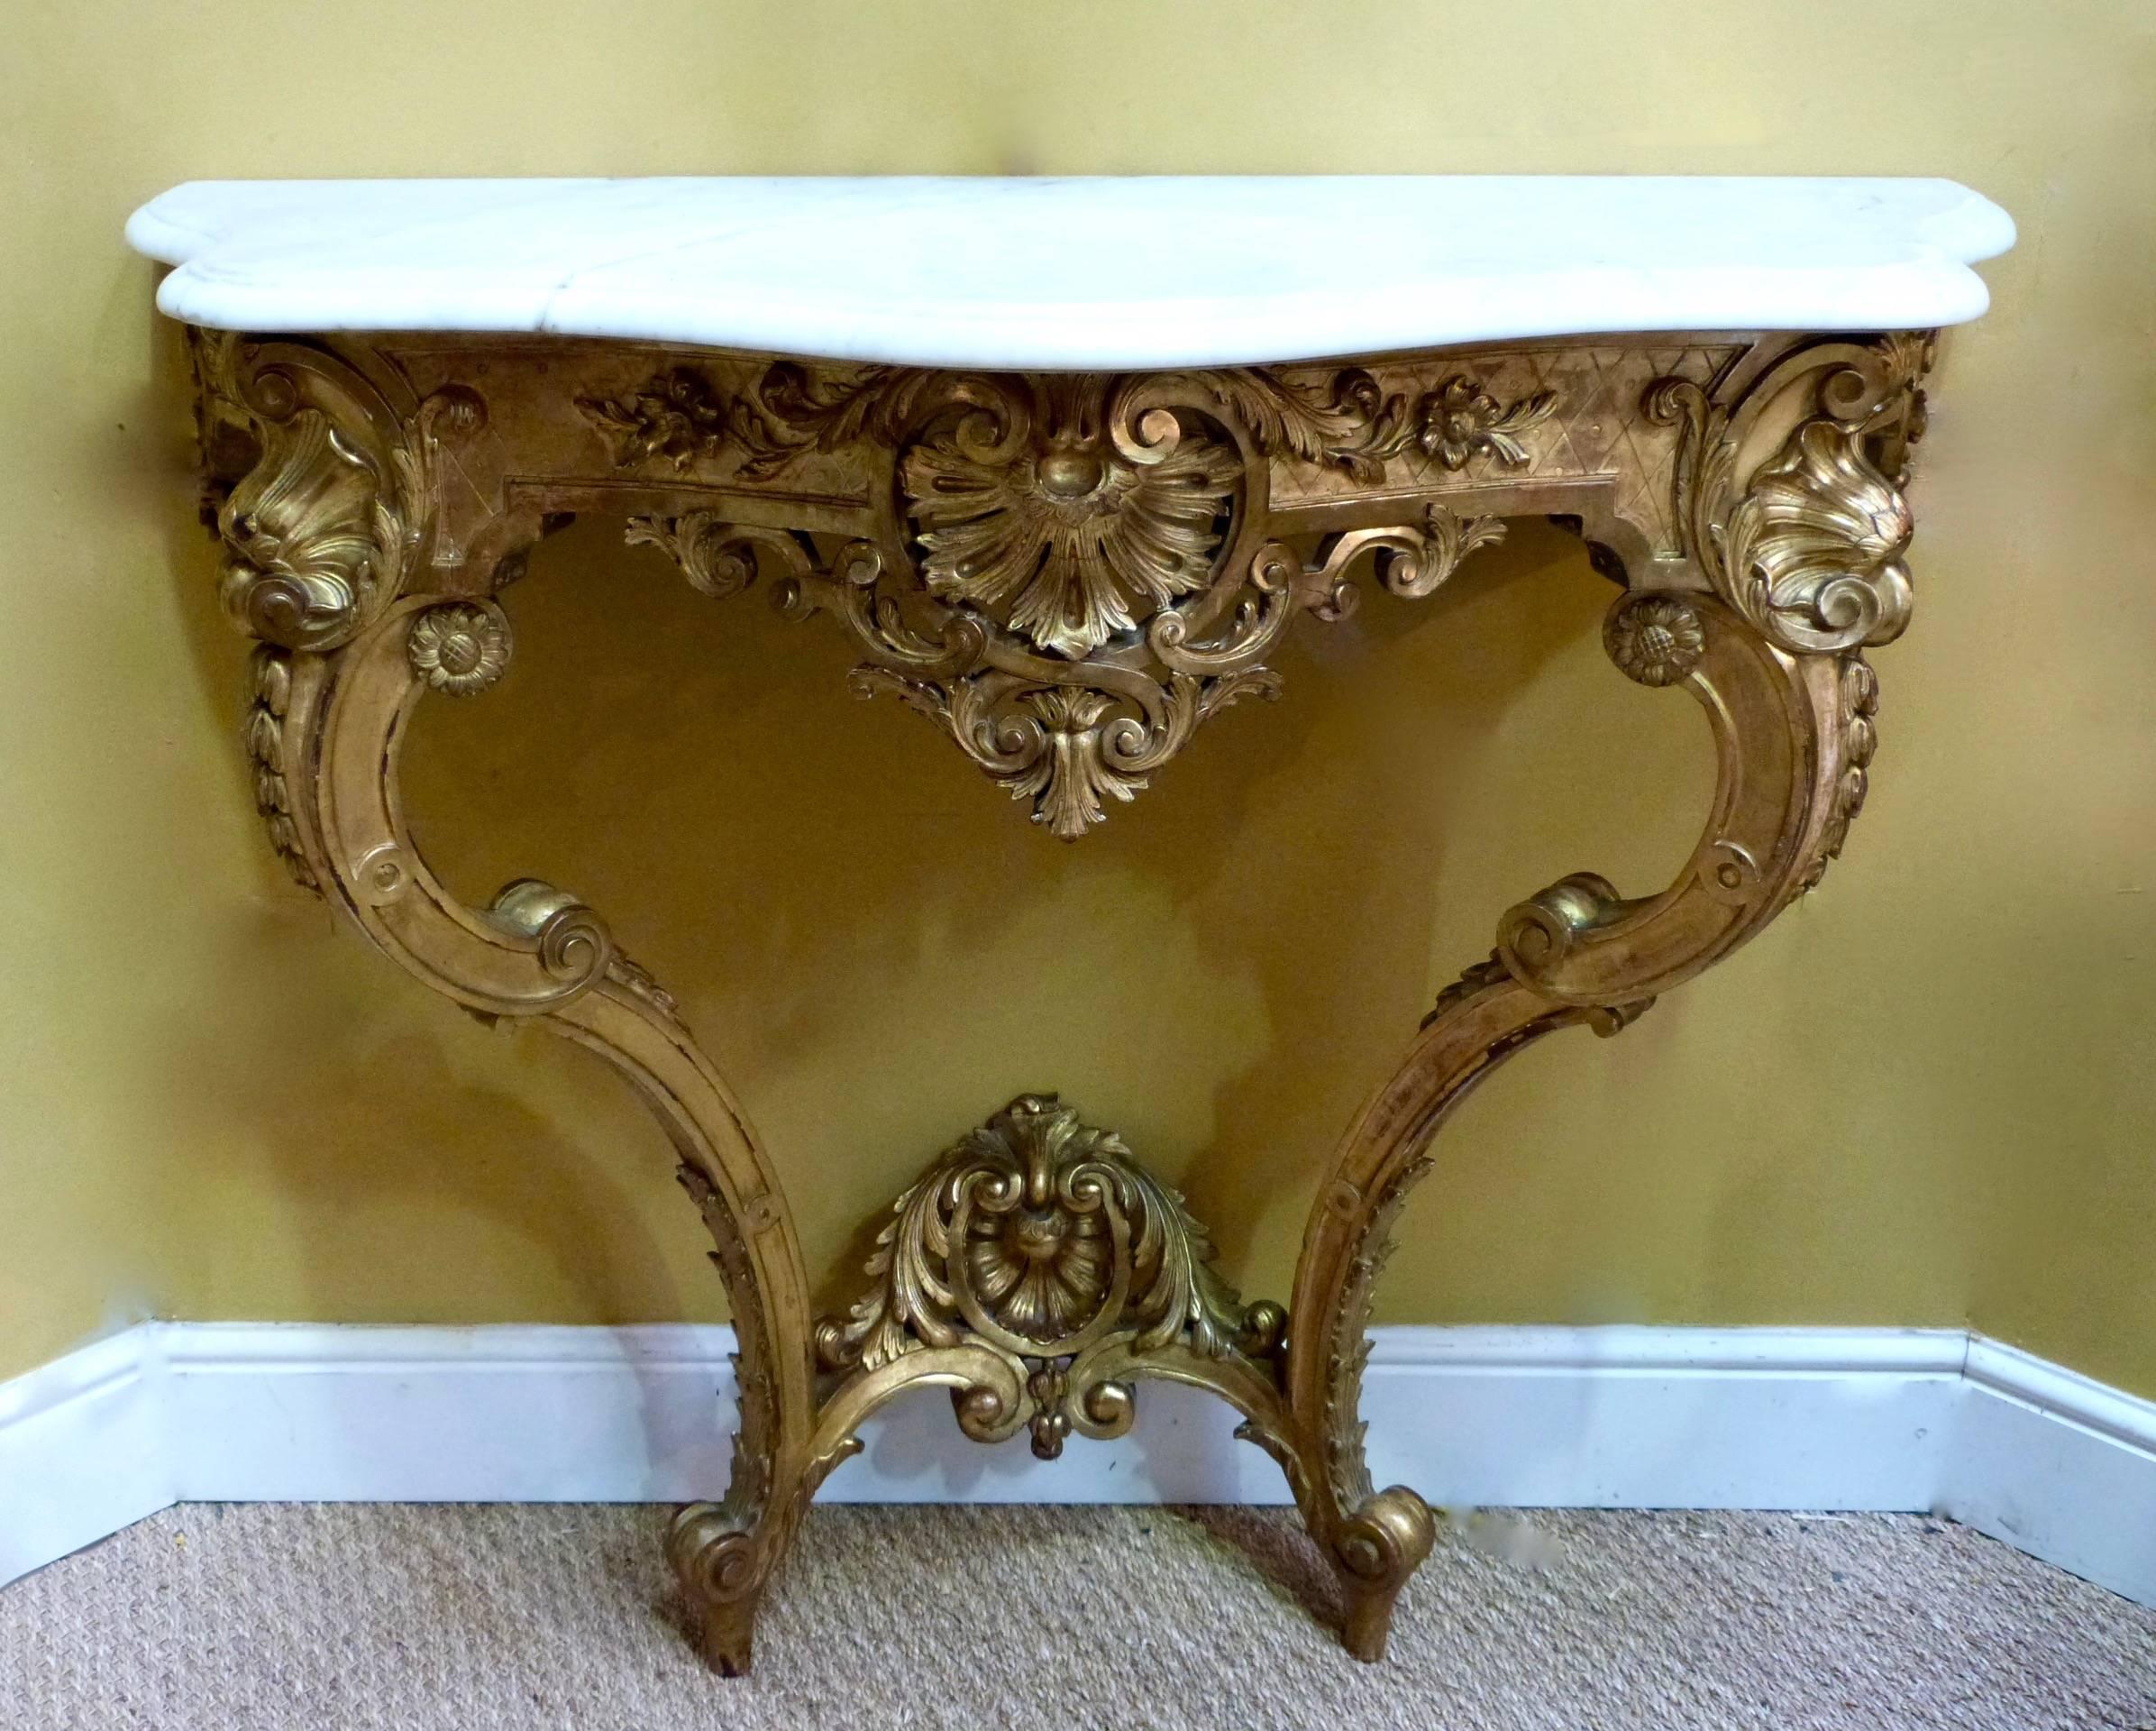 A fine quality late 19th century French carved giltwood Rococo style matching mirror and console table.